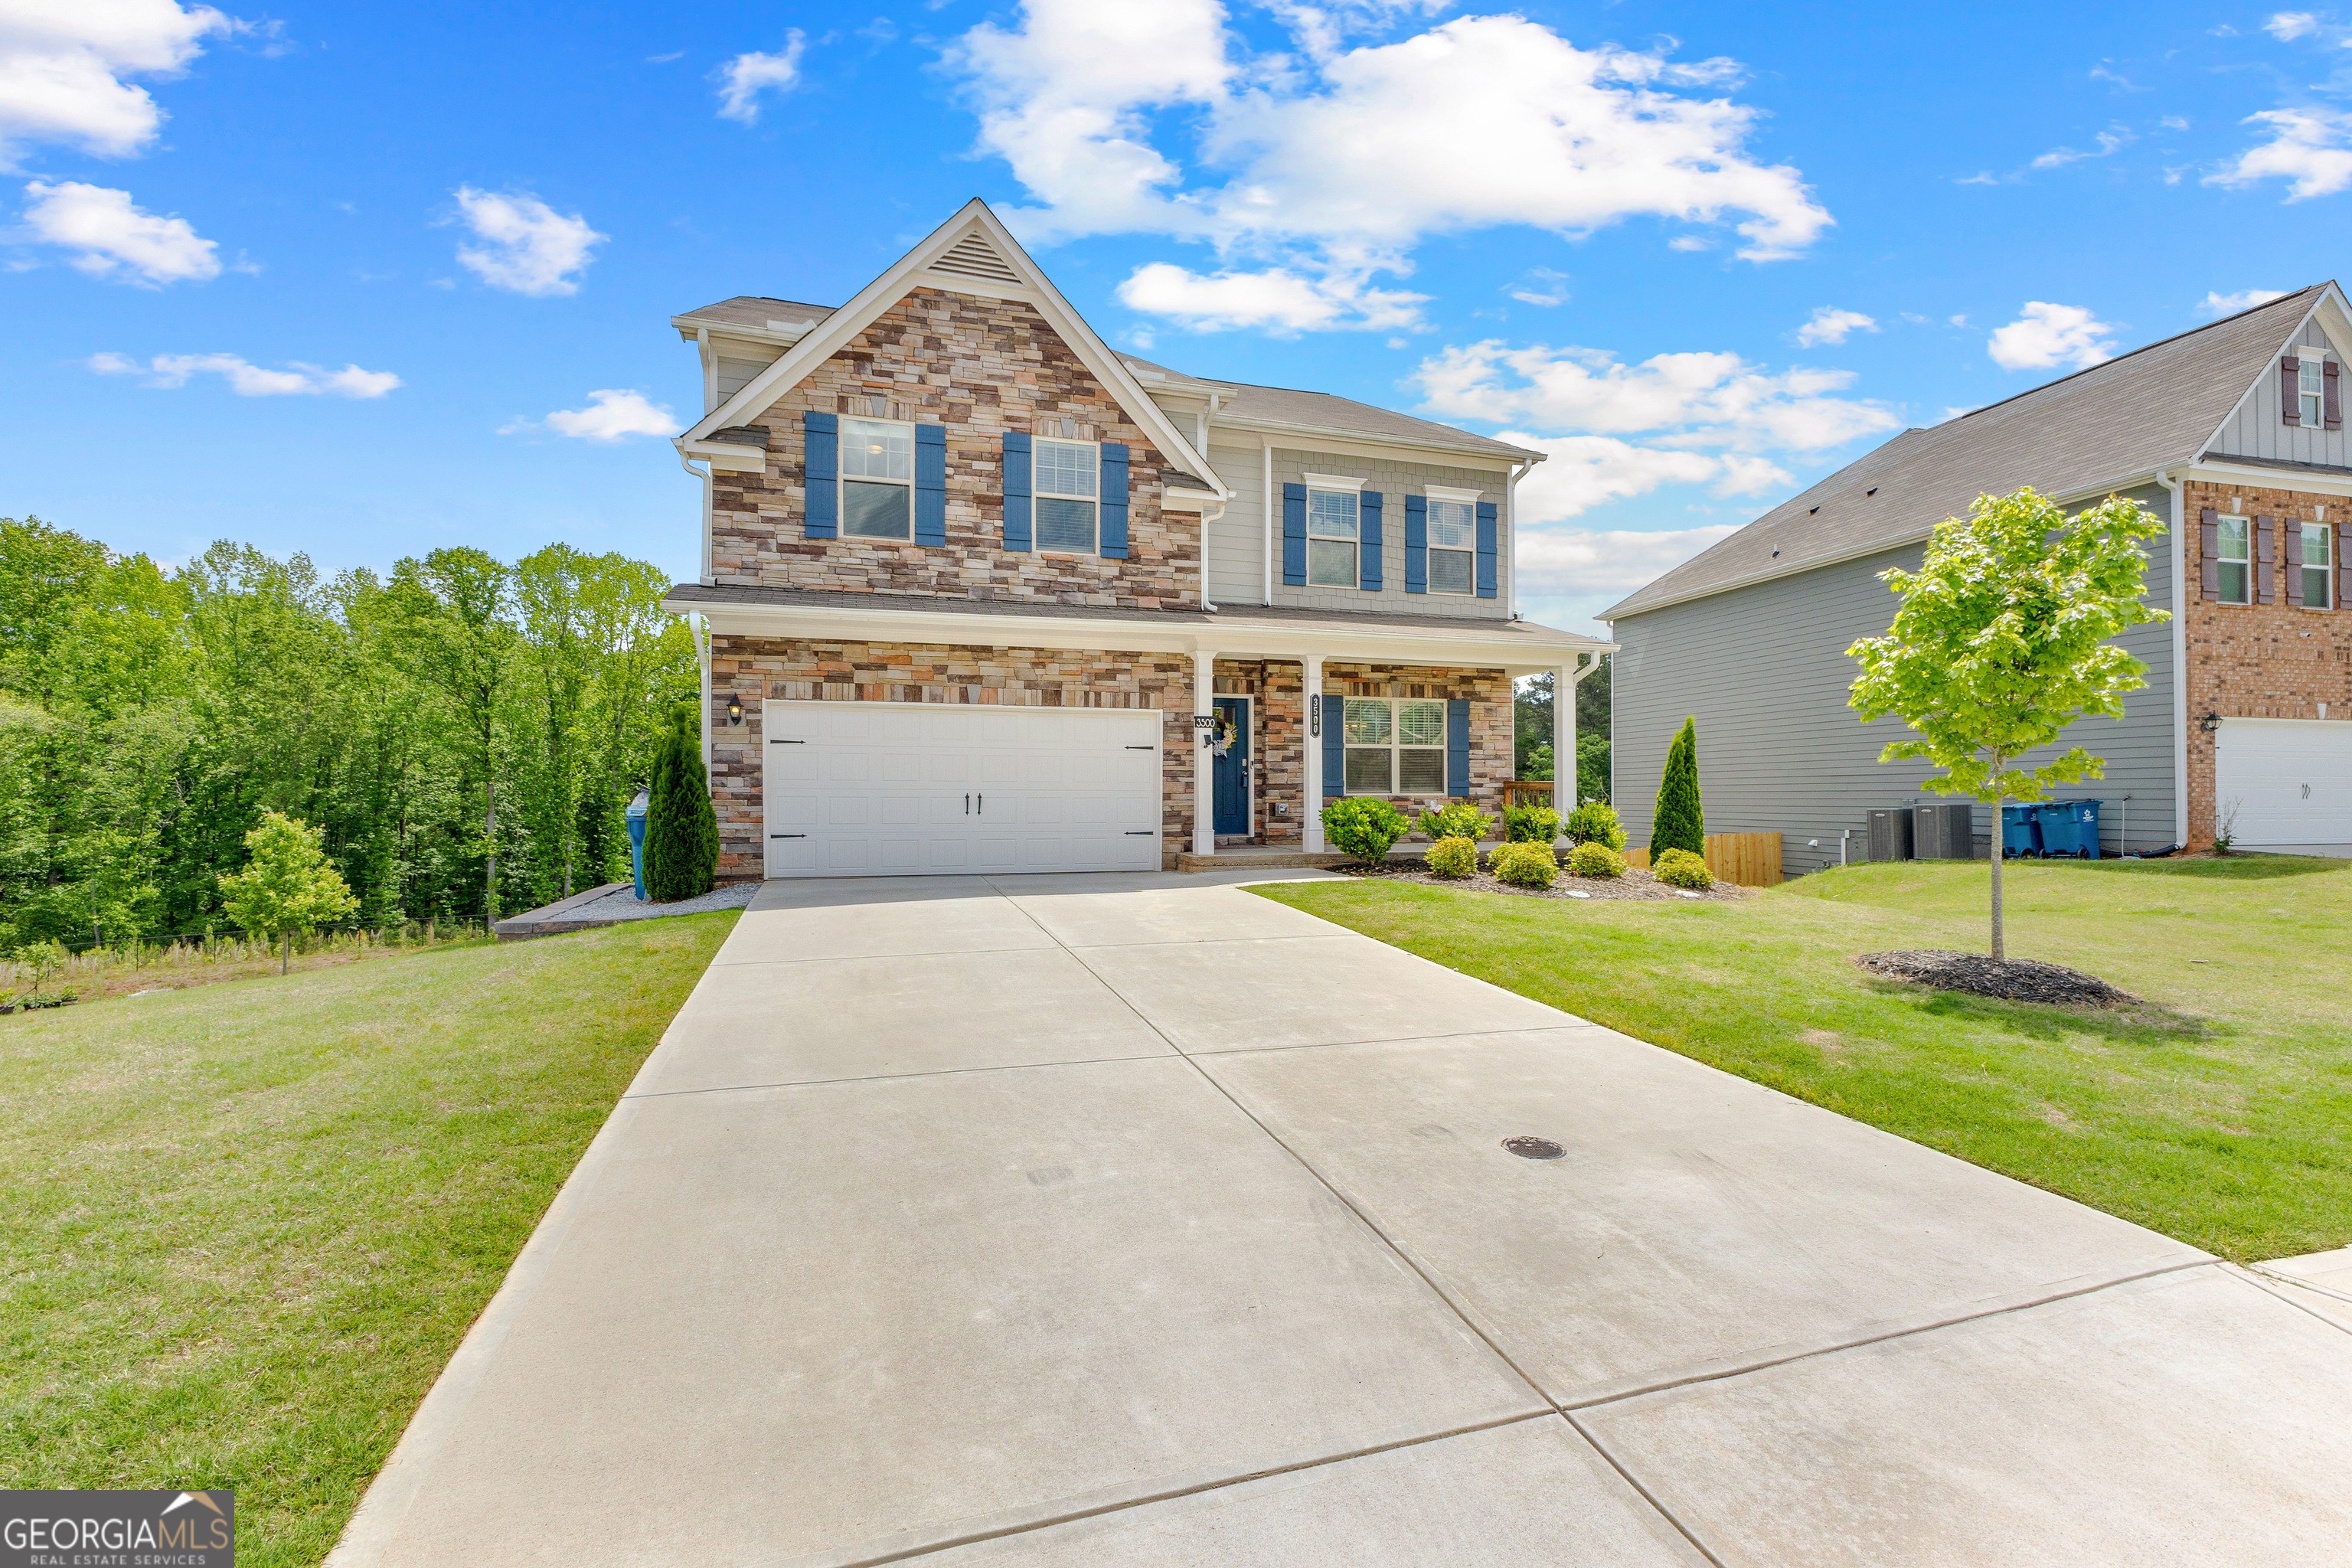 1. 3500 Meadow Grass Dr